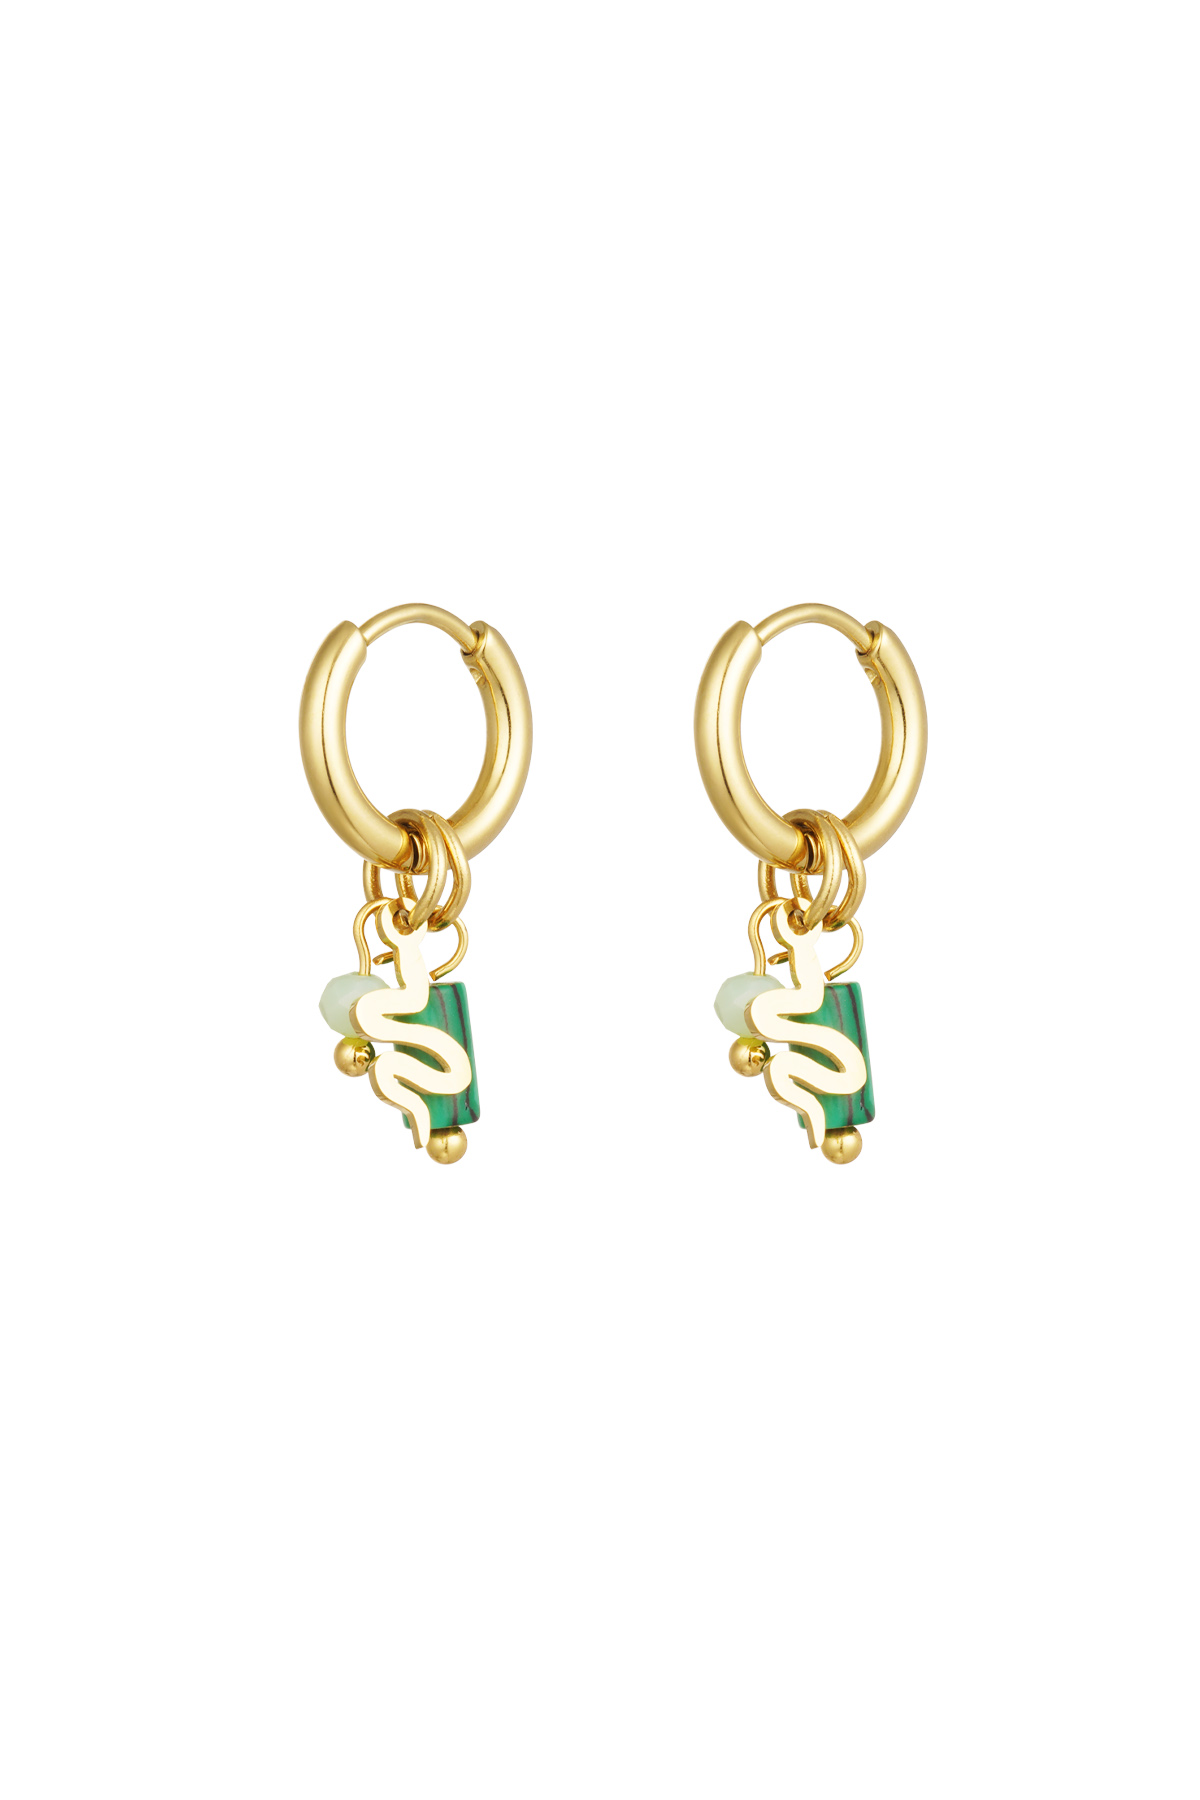 Earrings natural stone with snake detail - green gold h5 